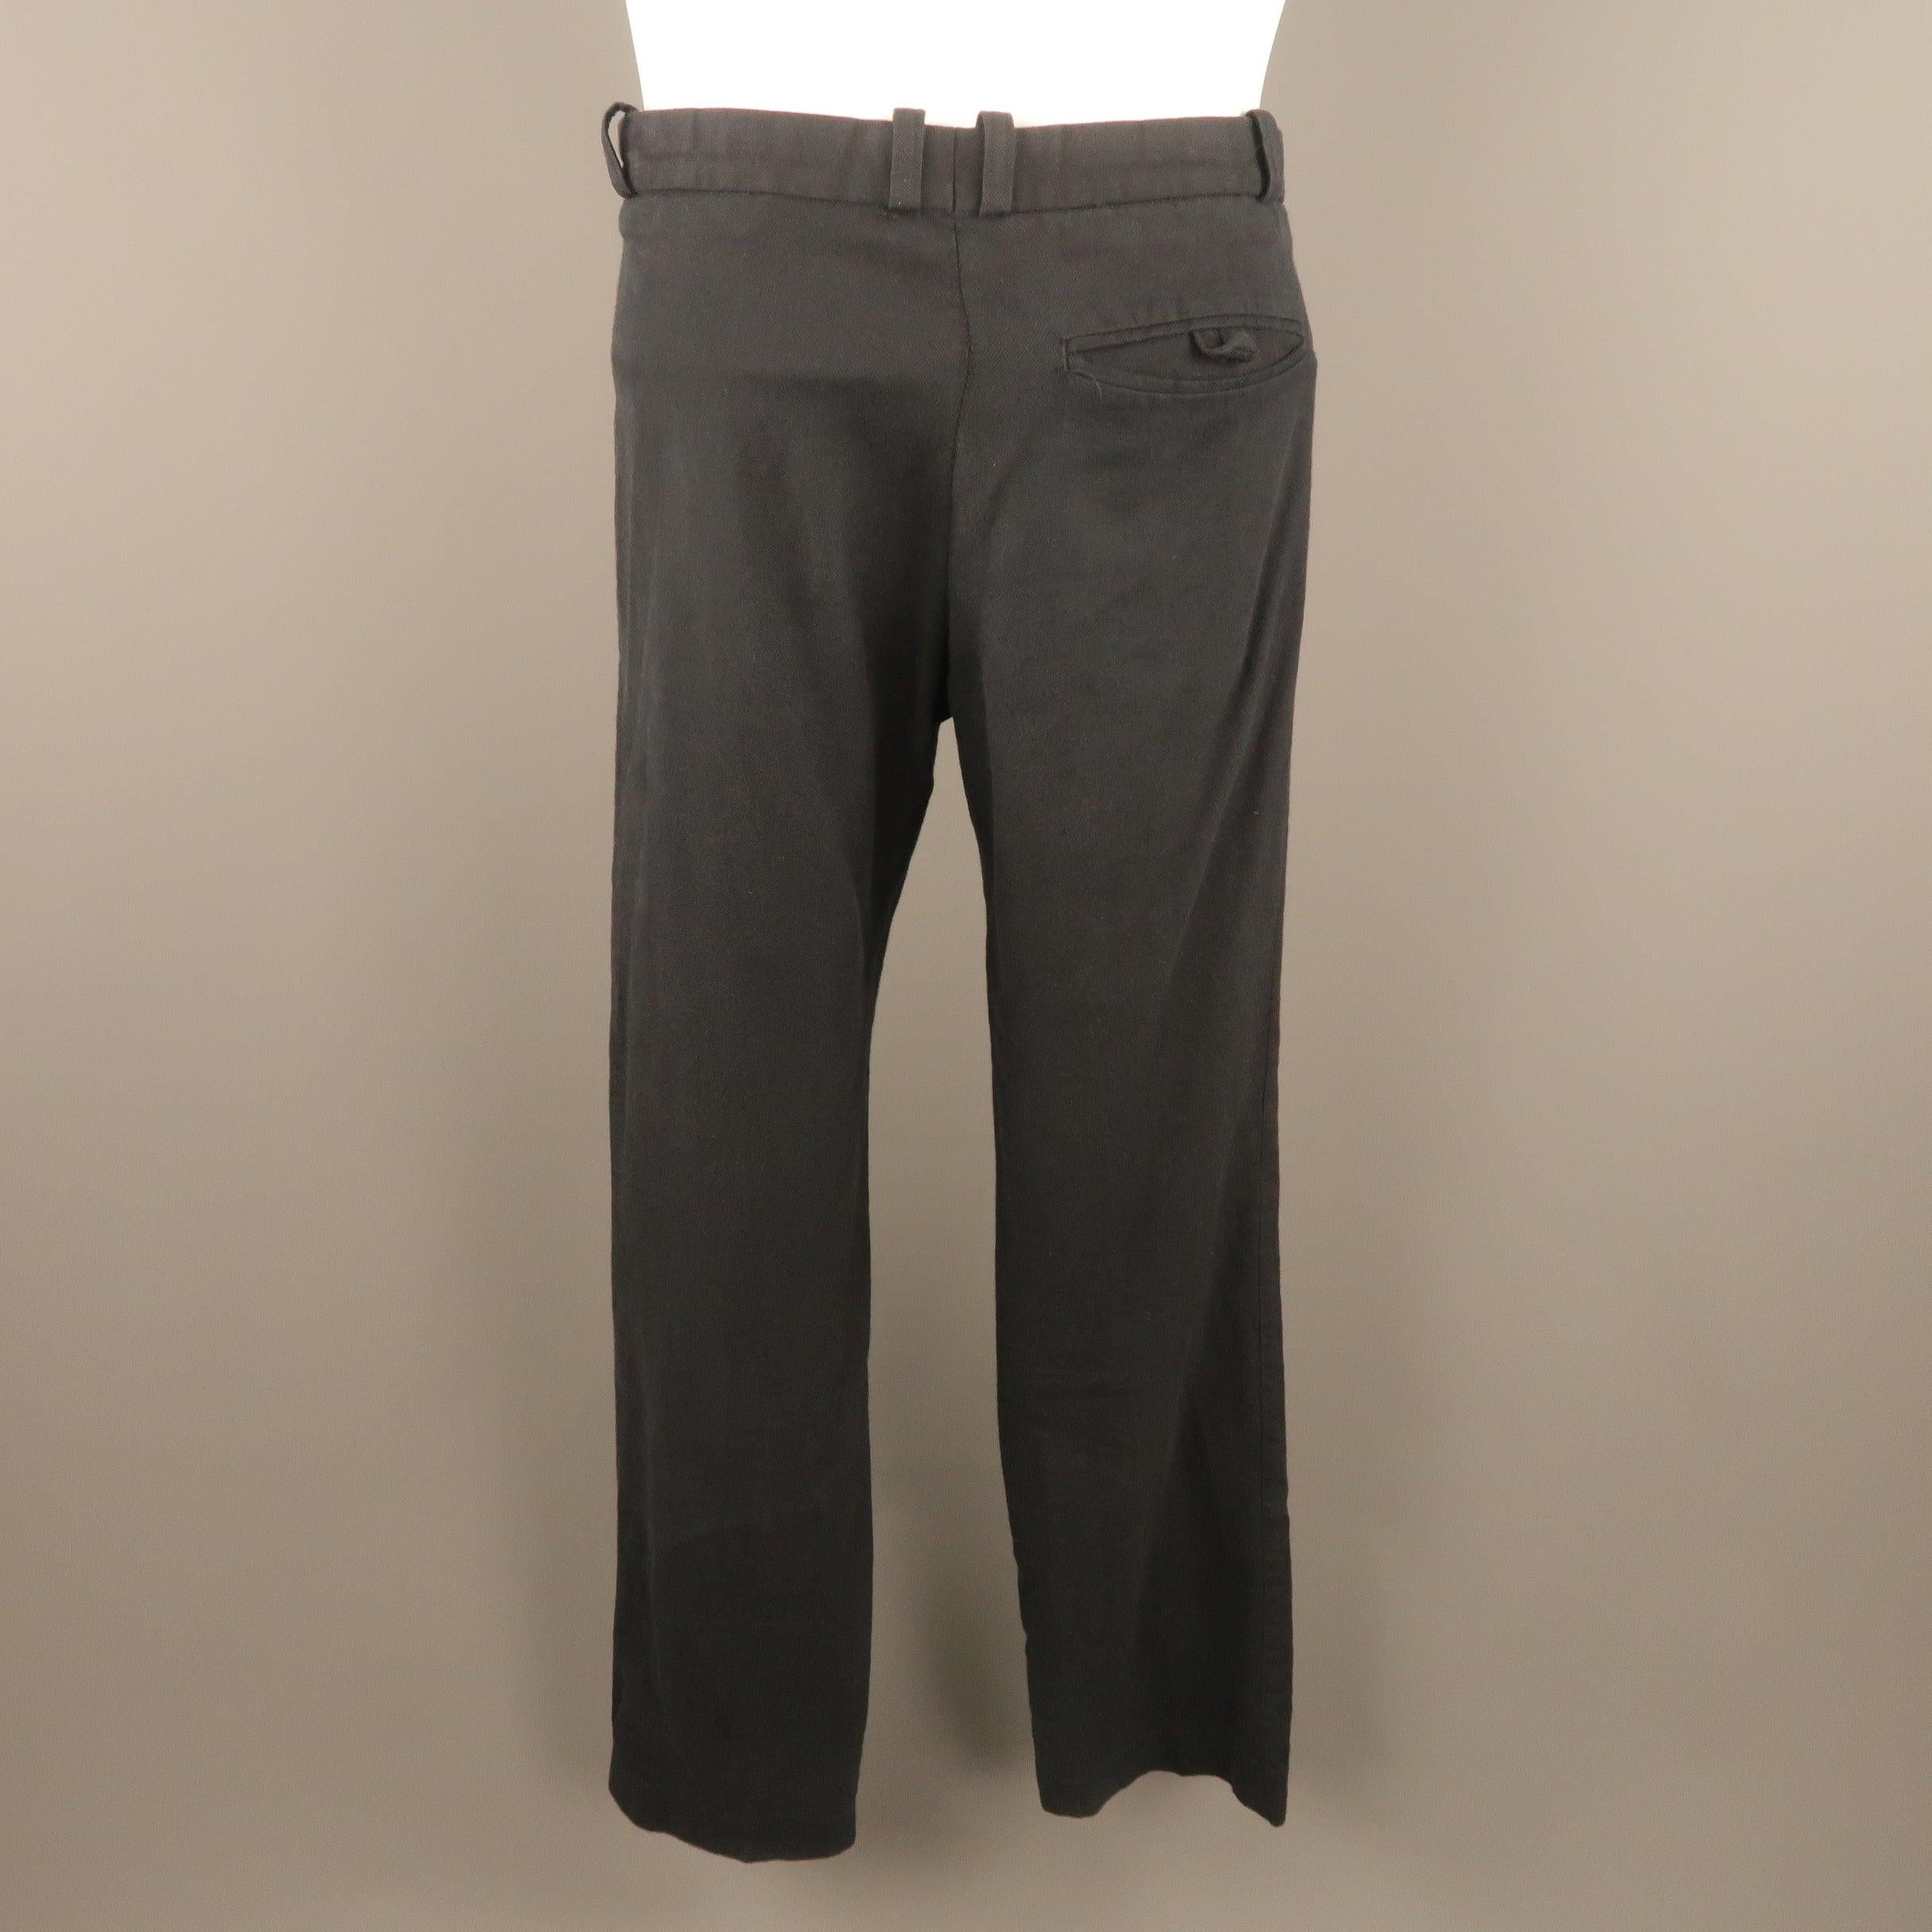 Men's STEPHAN SCHNEIDER Size 30 Navy Cotton Canvas Zip Fly Casual Pants